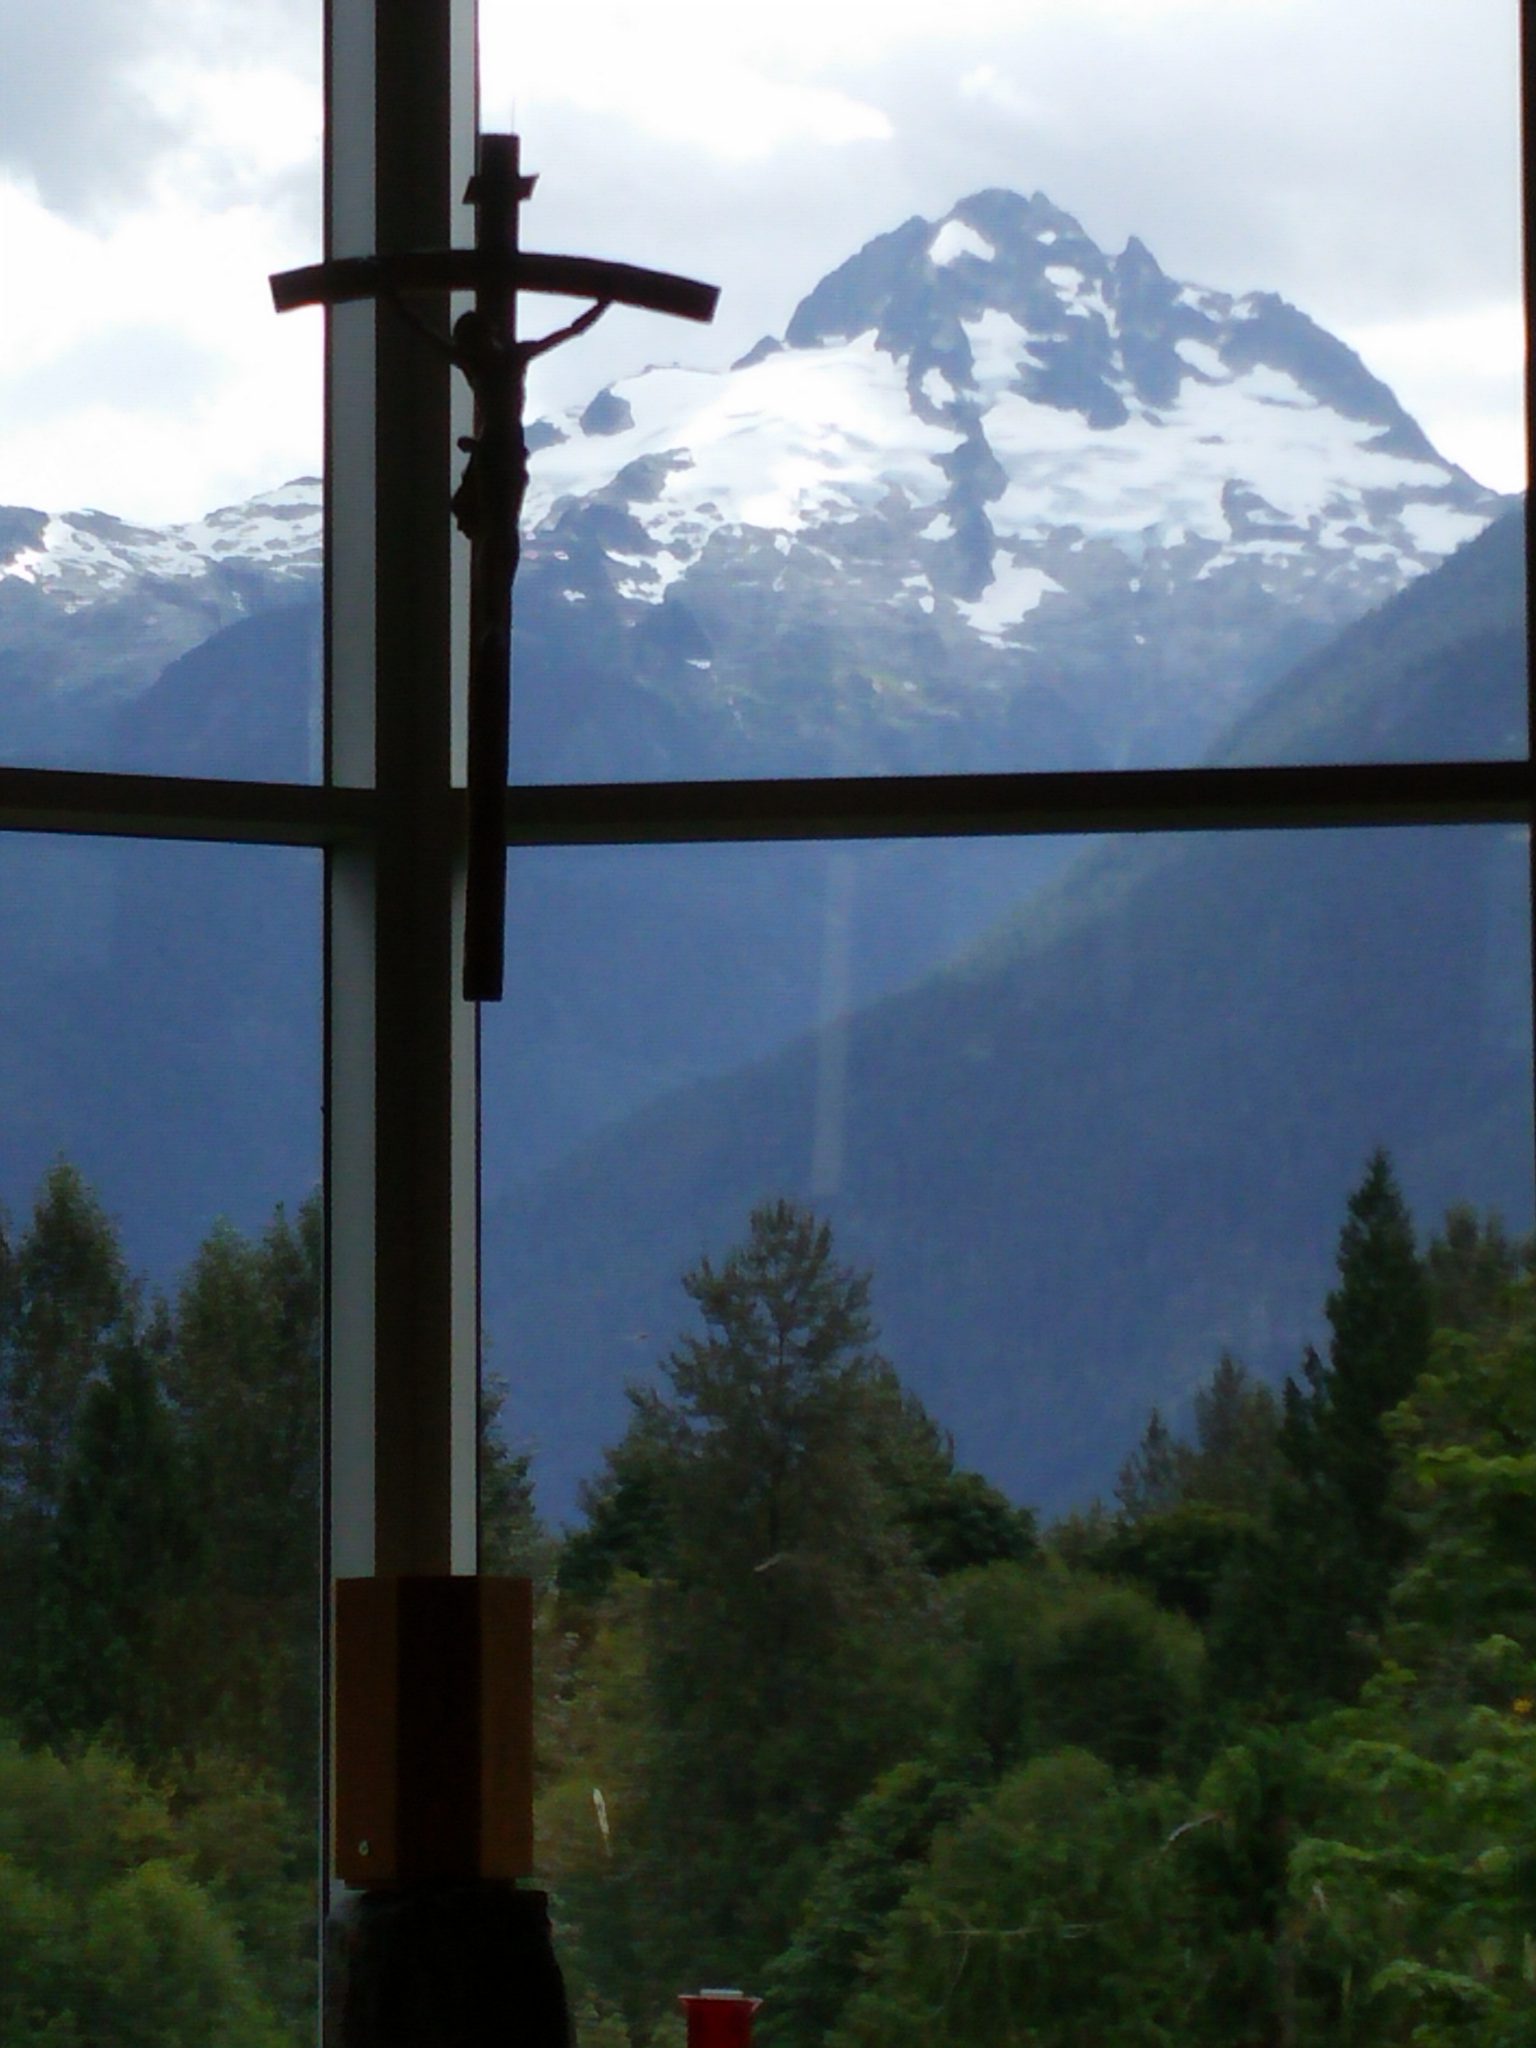 Queen of Peace Monastery, Squamish, BC. Source: Joan Levy Earle